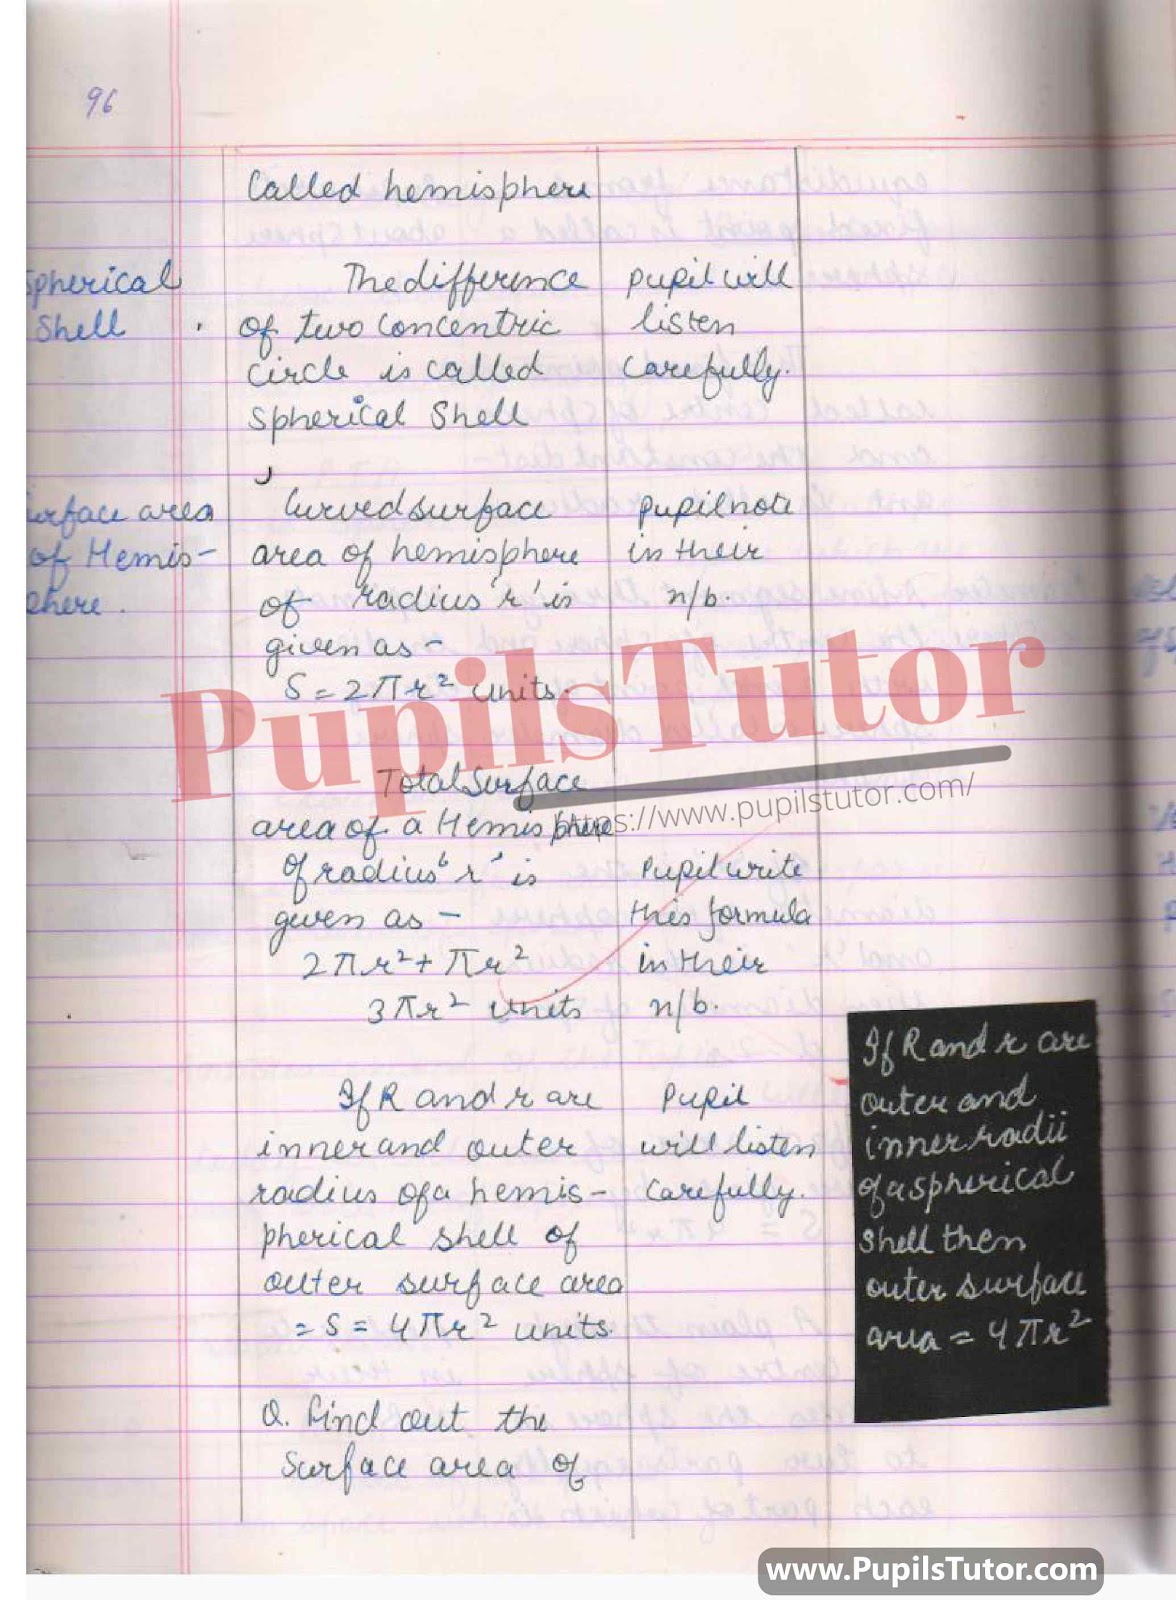 How To Make Maths Lesson Plan For Class 9 And 10 On Surface Area And Volume Of Sphere And Hemisphere In English – [Page And Photo 4] – pupilstutor.com